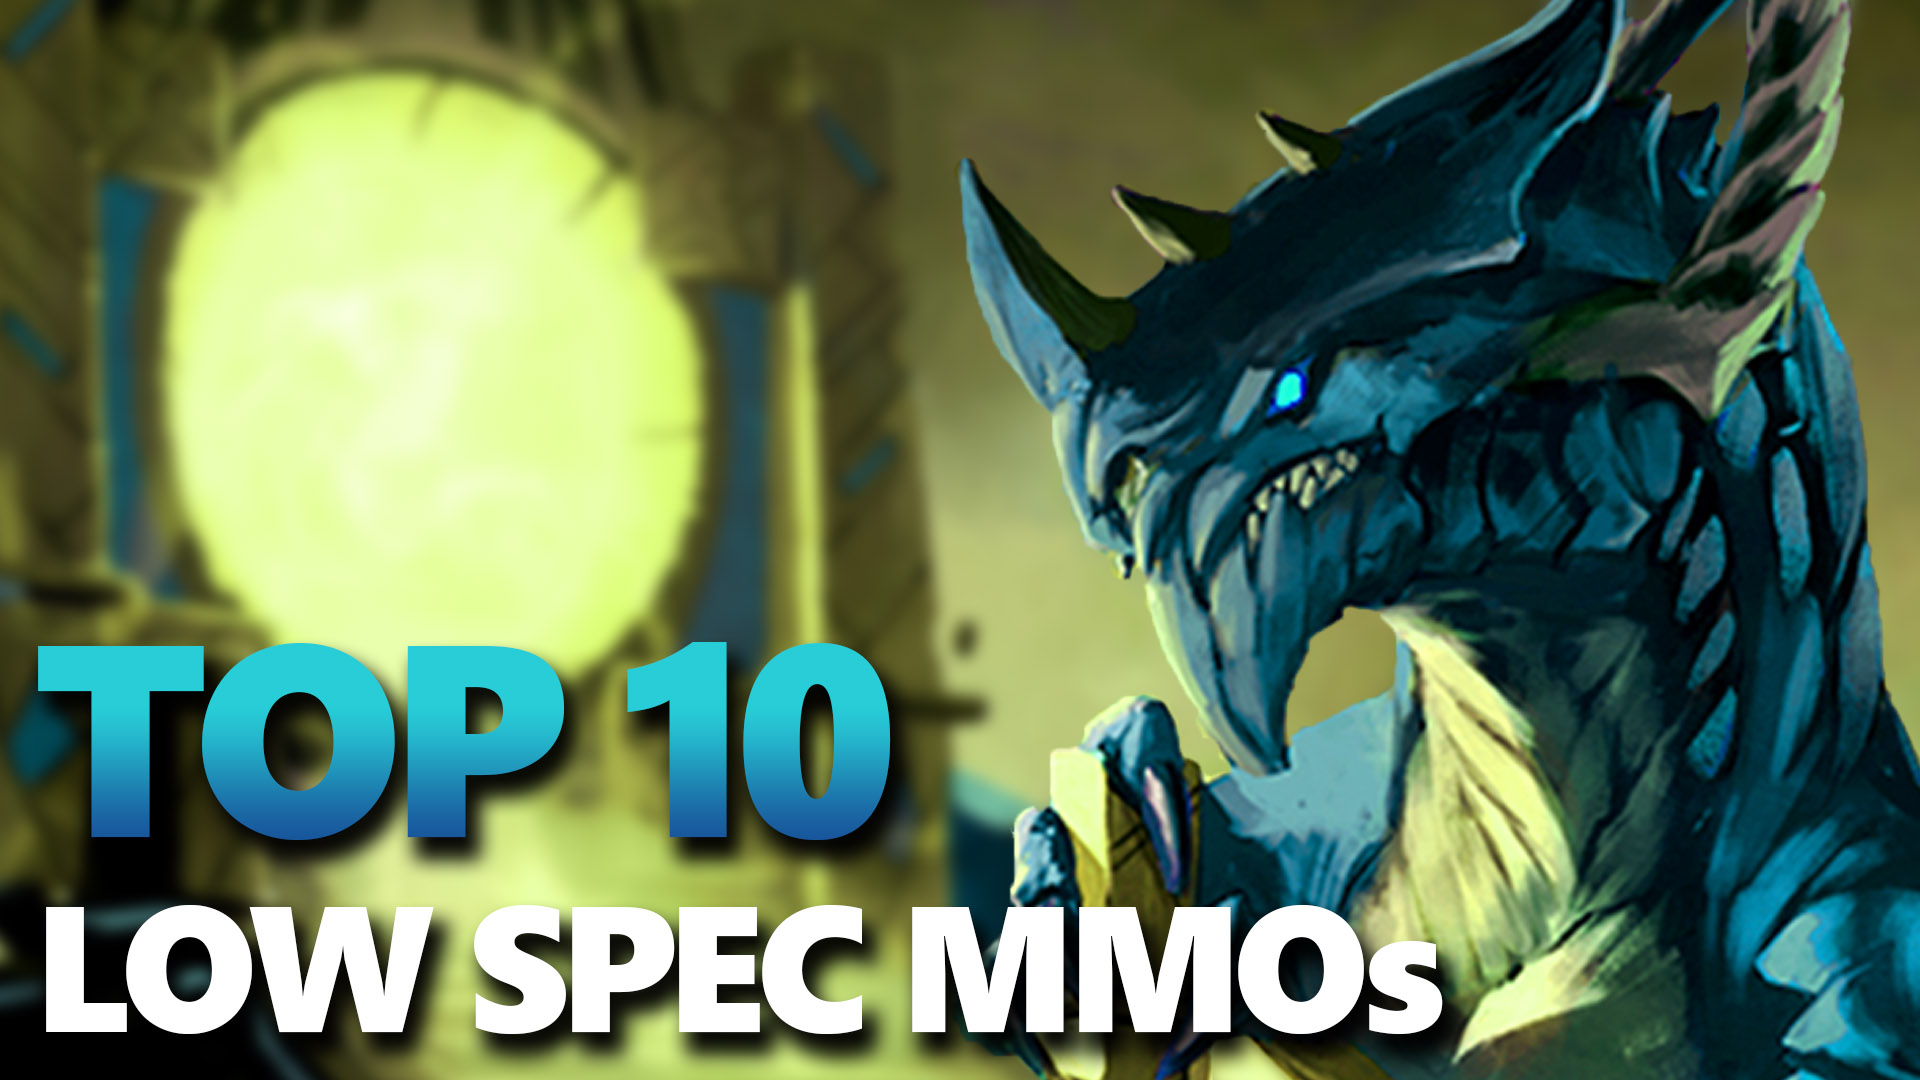 Top 10 Low Spec MMOs